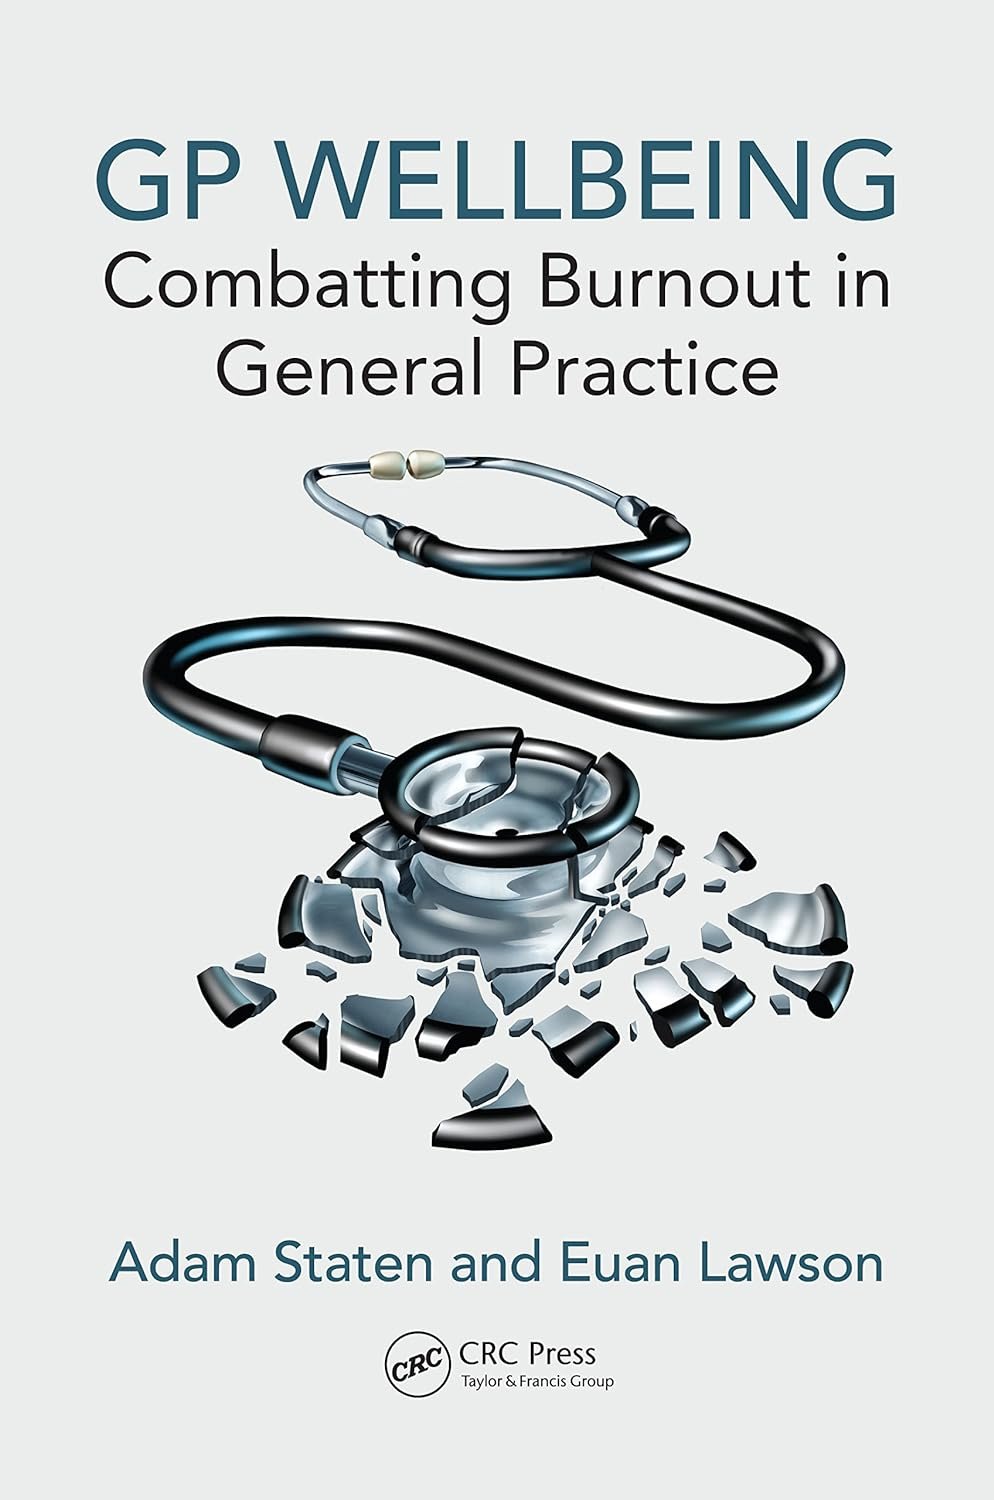  This is the first book to explore the impact of 'burnout' on the current NHS GP workforce and how this can be addressed, from an insider GP perspective. Adam Staten, recently qualified GP, and Euan Lawson, Fellow of the RCGP with over 20 years exper